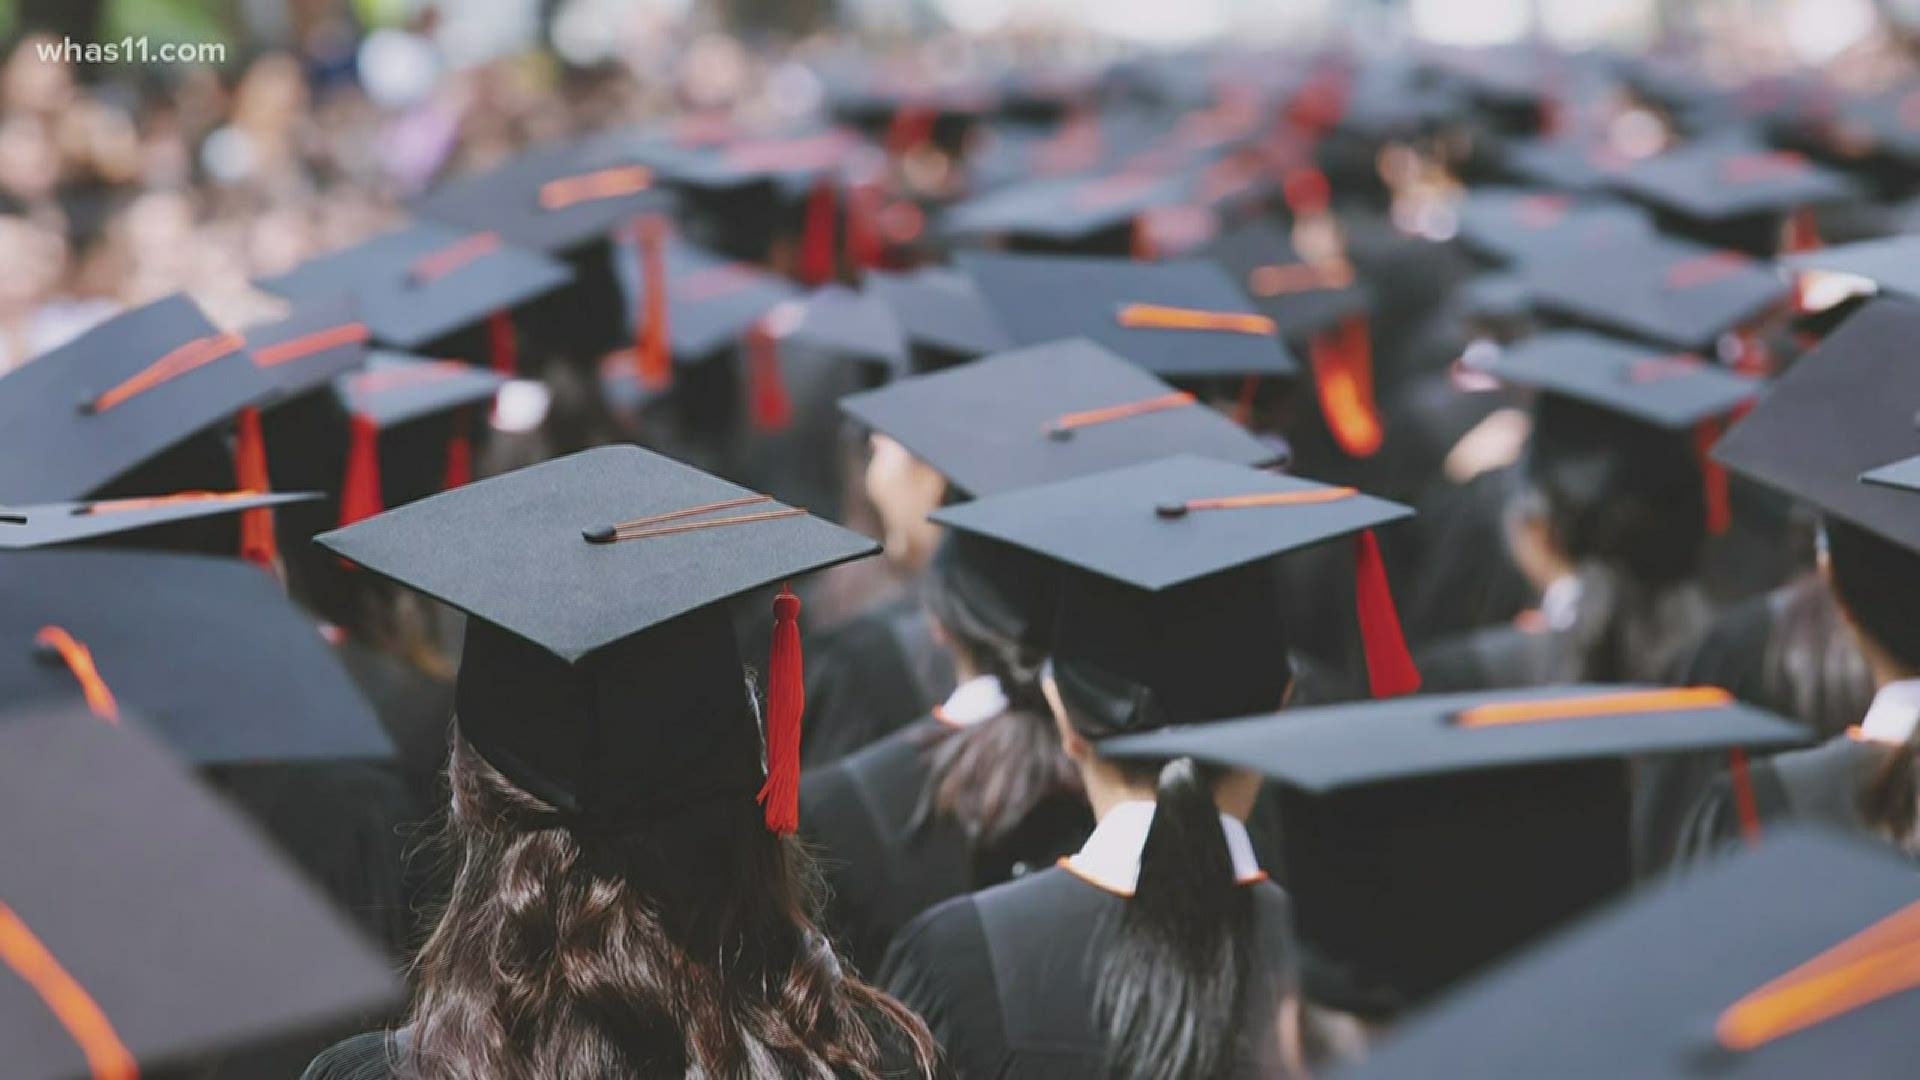 While this year's graduations will be far from traditional, let's explore some common grad traditions like 'Pomp and Circumstance' and caps and gowns.